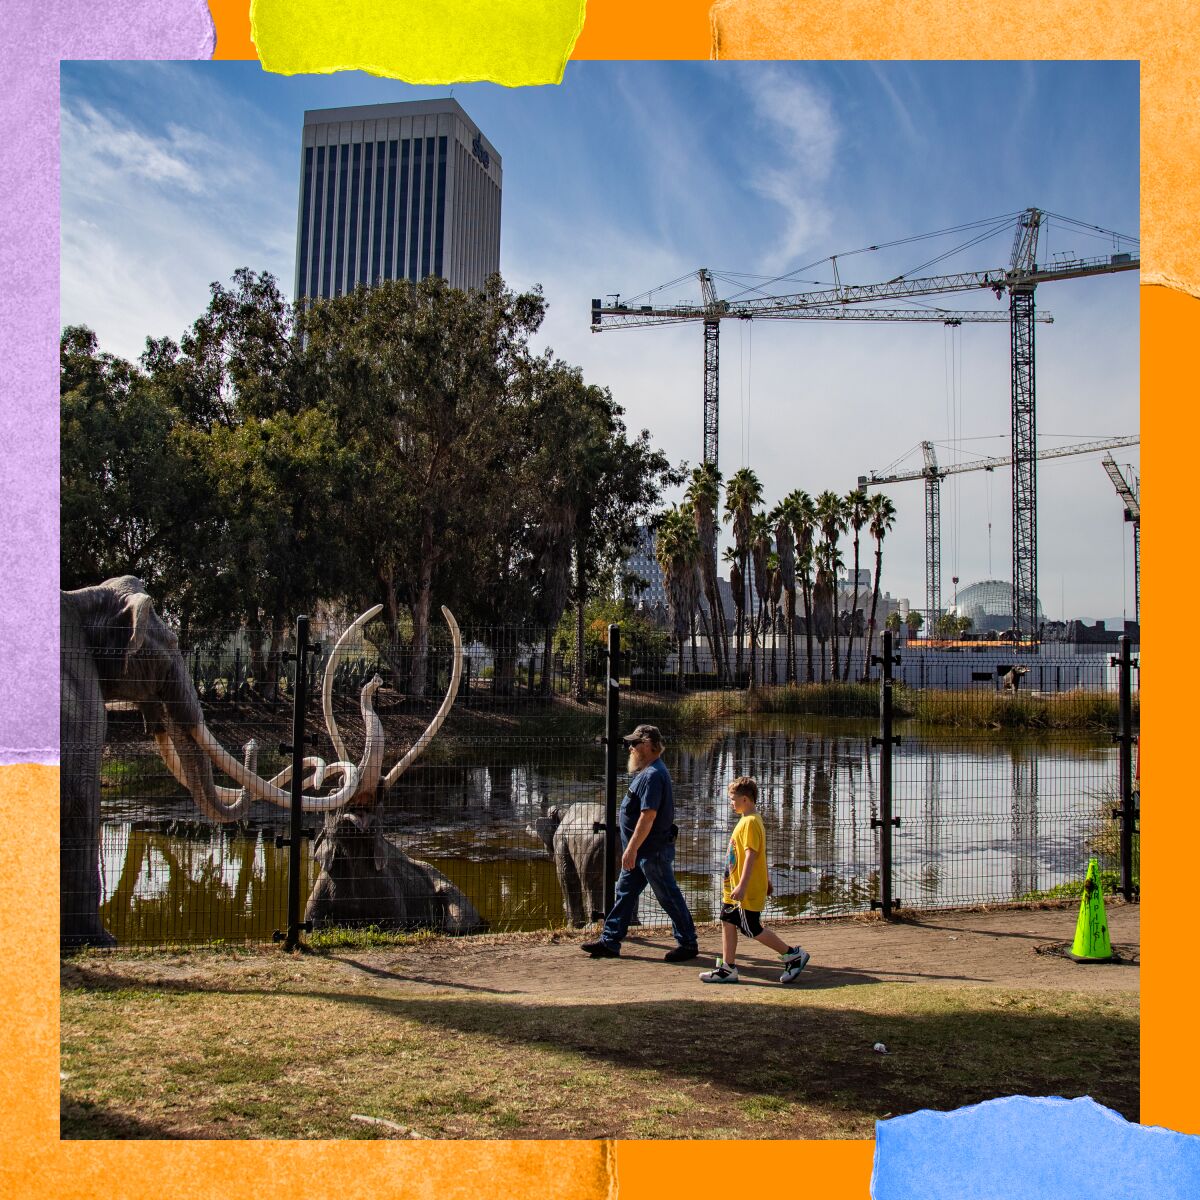 People walk alongside a body of water with statues of woolly mammoths. In the background are construction cranes.